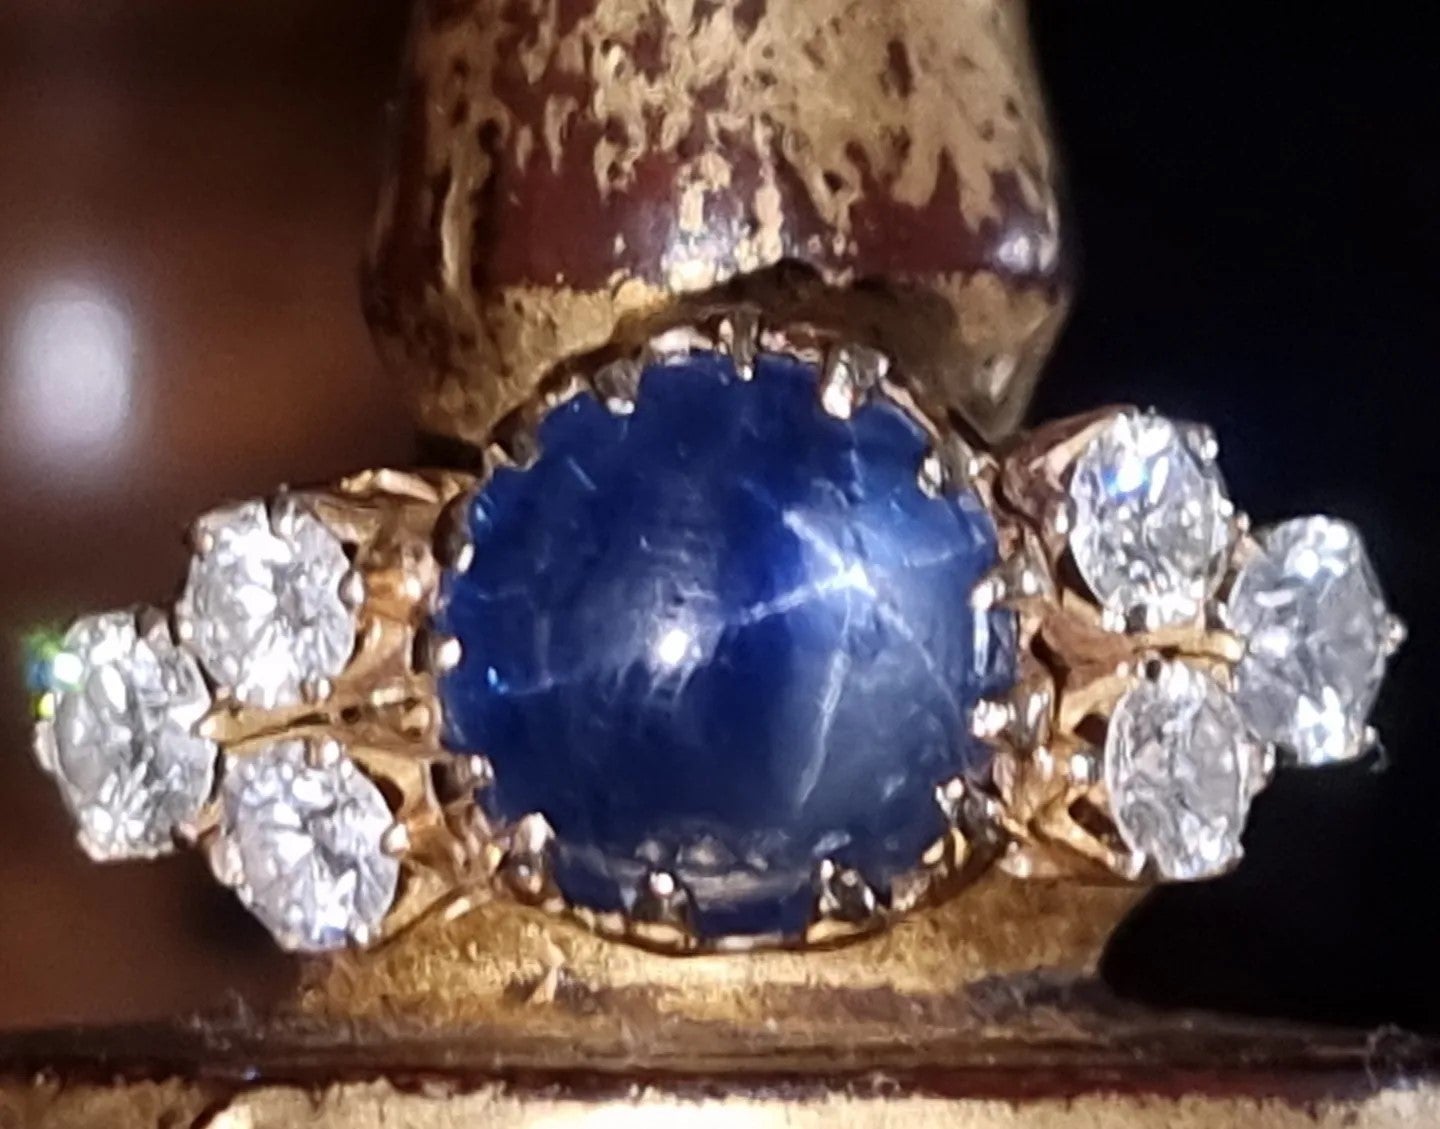 RARE BURMESE (Mogok - Myanmar) BLUE STAR SAPPHIRE AND DIAMOND RING, not heated, not treated.
Accompanied by Lotus Gemology Laboratory (Richard W. HUGHES) certificate no. 2940-9400, stating that the sapphire is of Burma origin, with no indications of